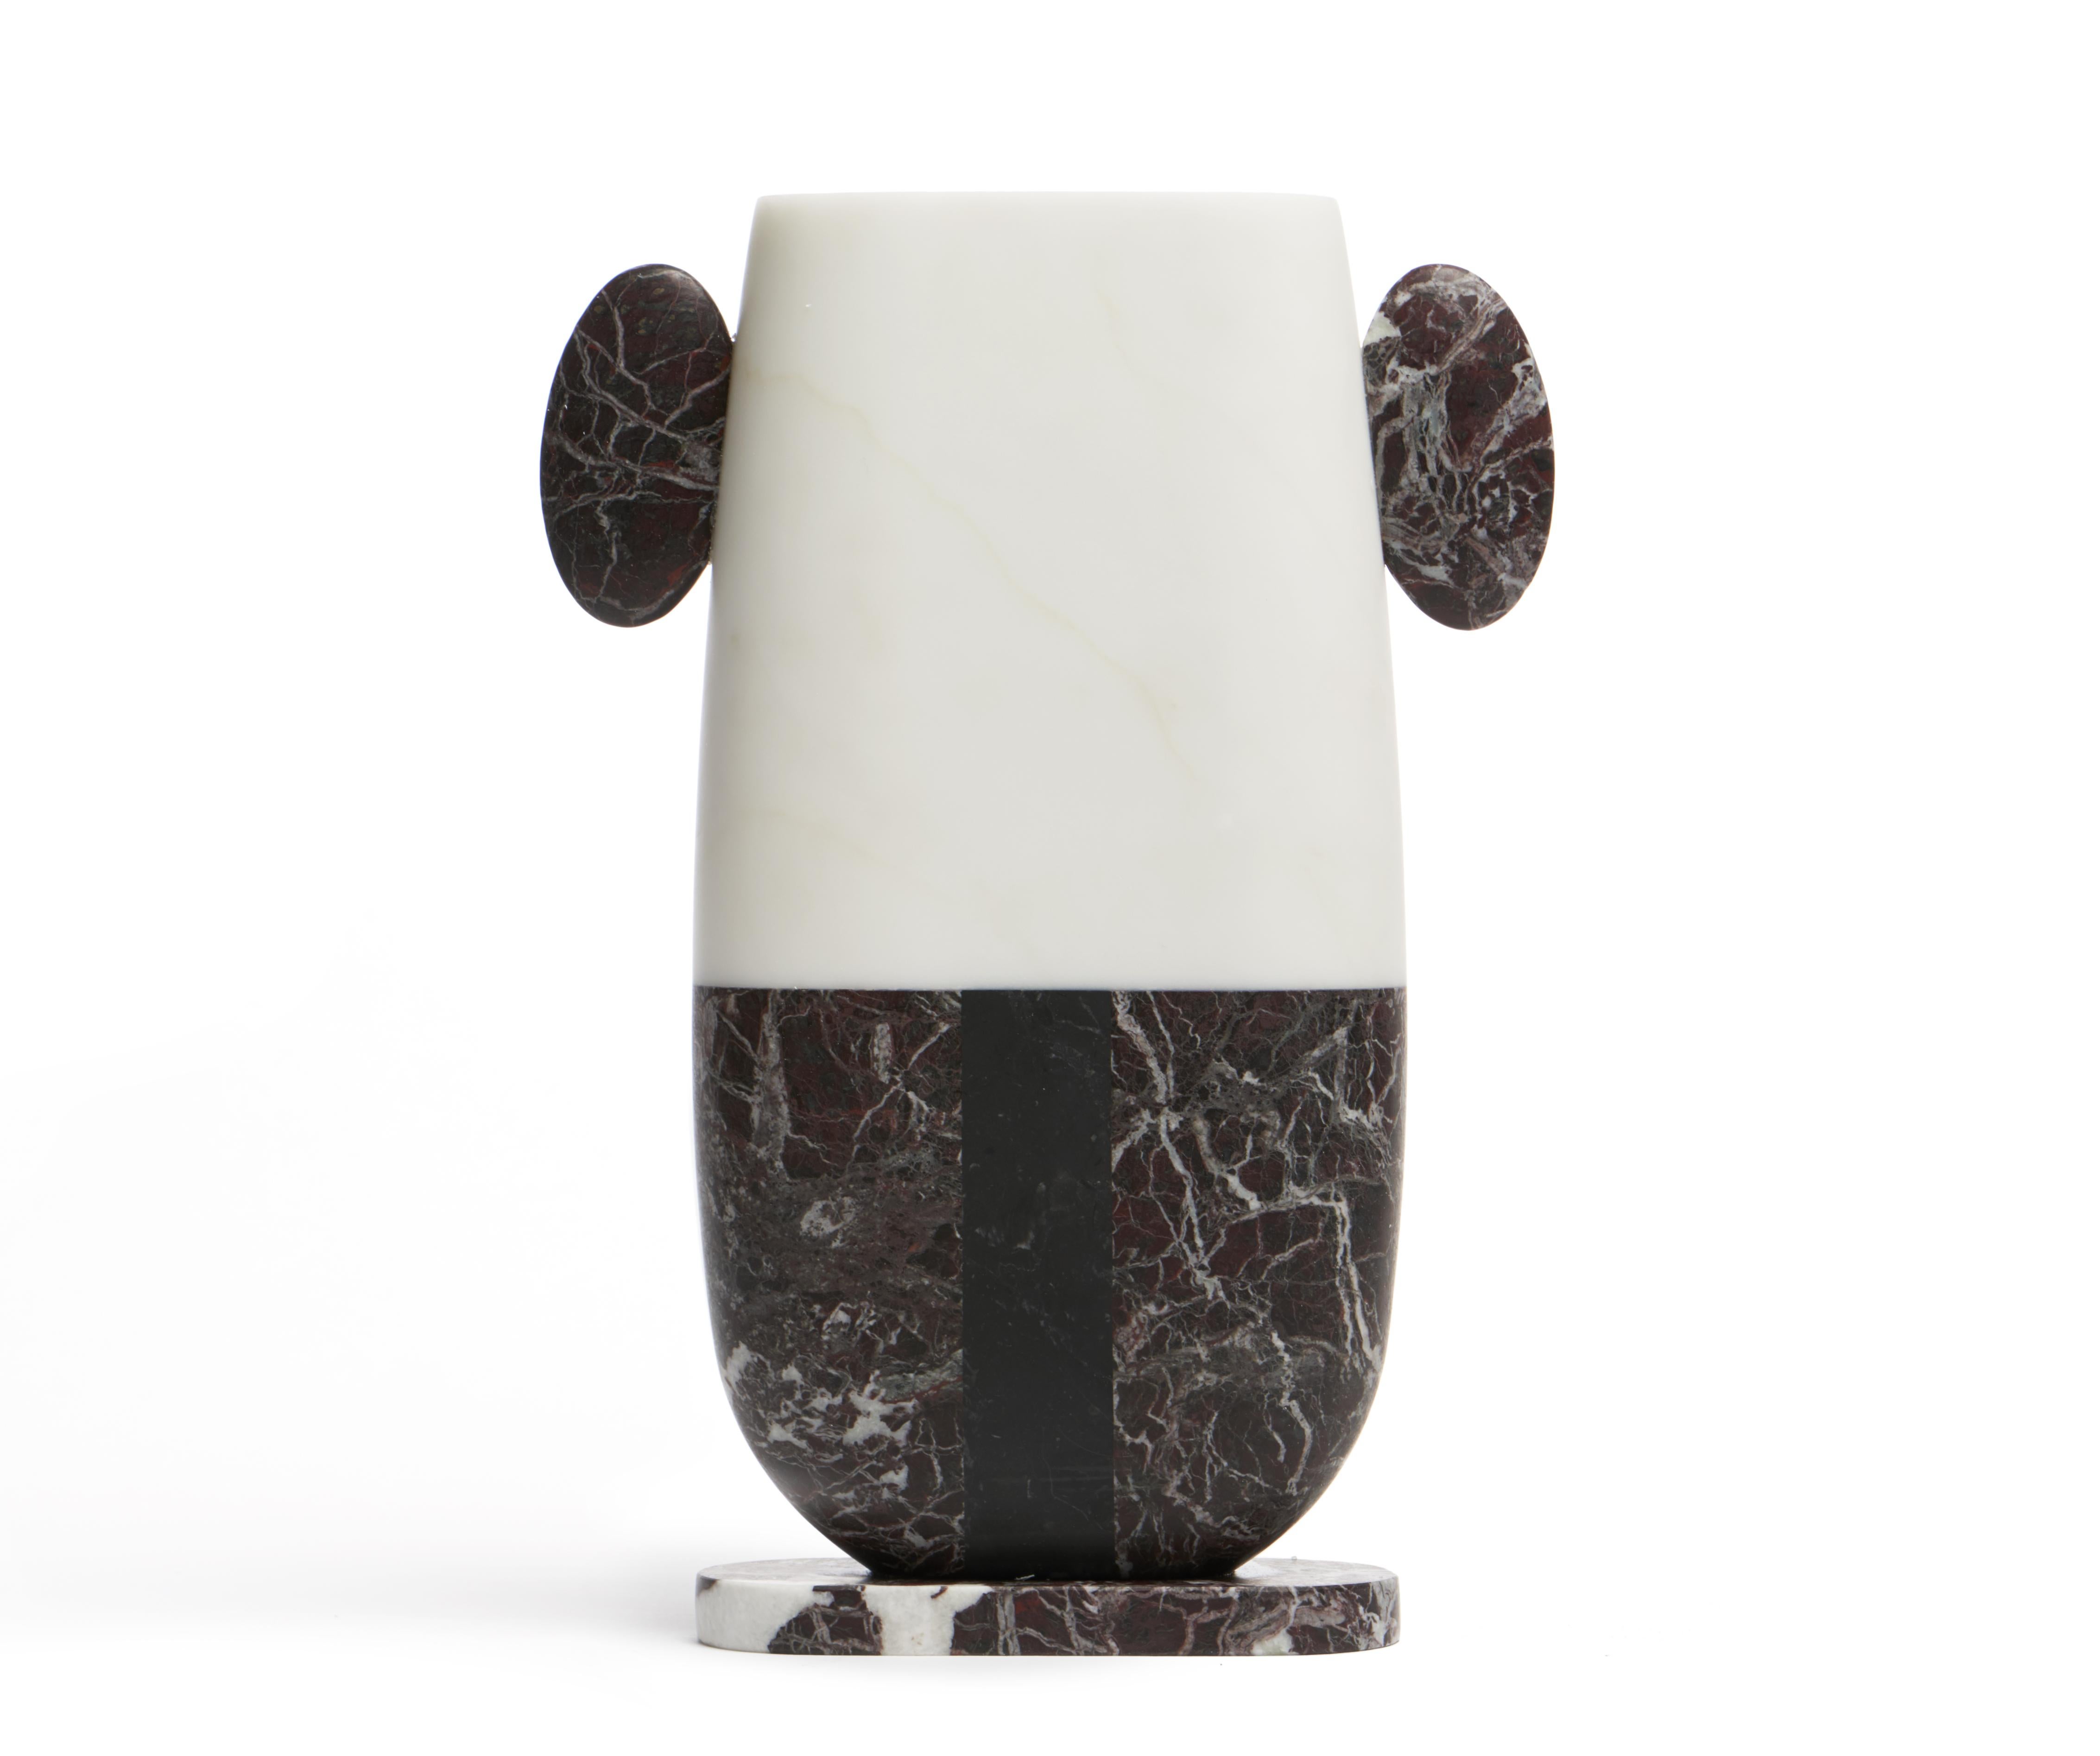 Pietro marble vase by Matteo Cibic
Dimensions: 10.7 x 2.9 x 15.1 cm
Materials:
Bianco
Michelangelo,
Rosso Levanto

Vases made of various marbles cannot guarantee watertightness, better not use for cut flowers unless with the use vials for each